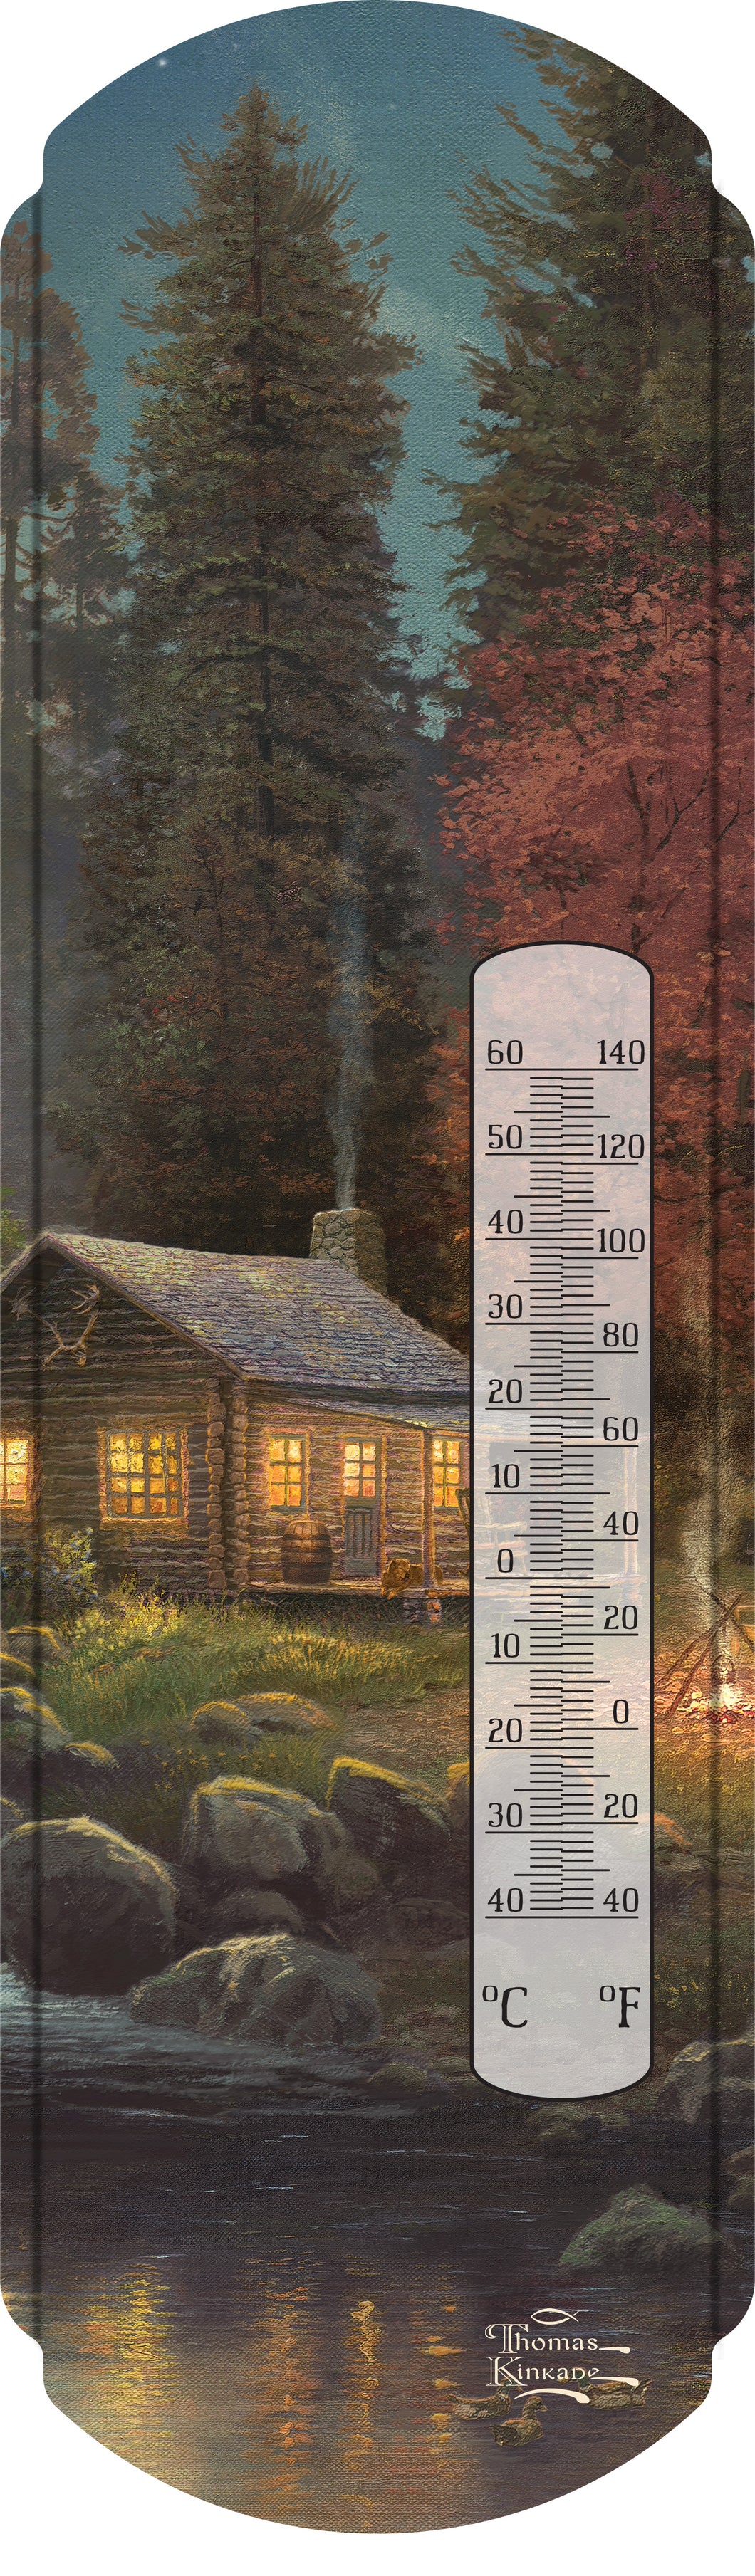 55025 - THERMOMETER - THOMAS KINKADE - AWAY FROM IT ALL